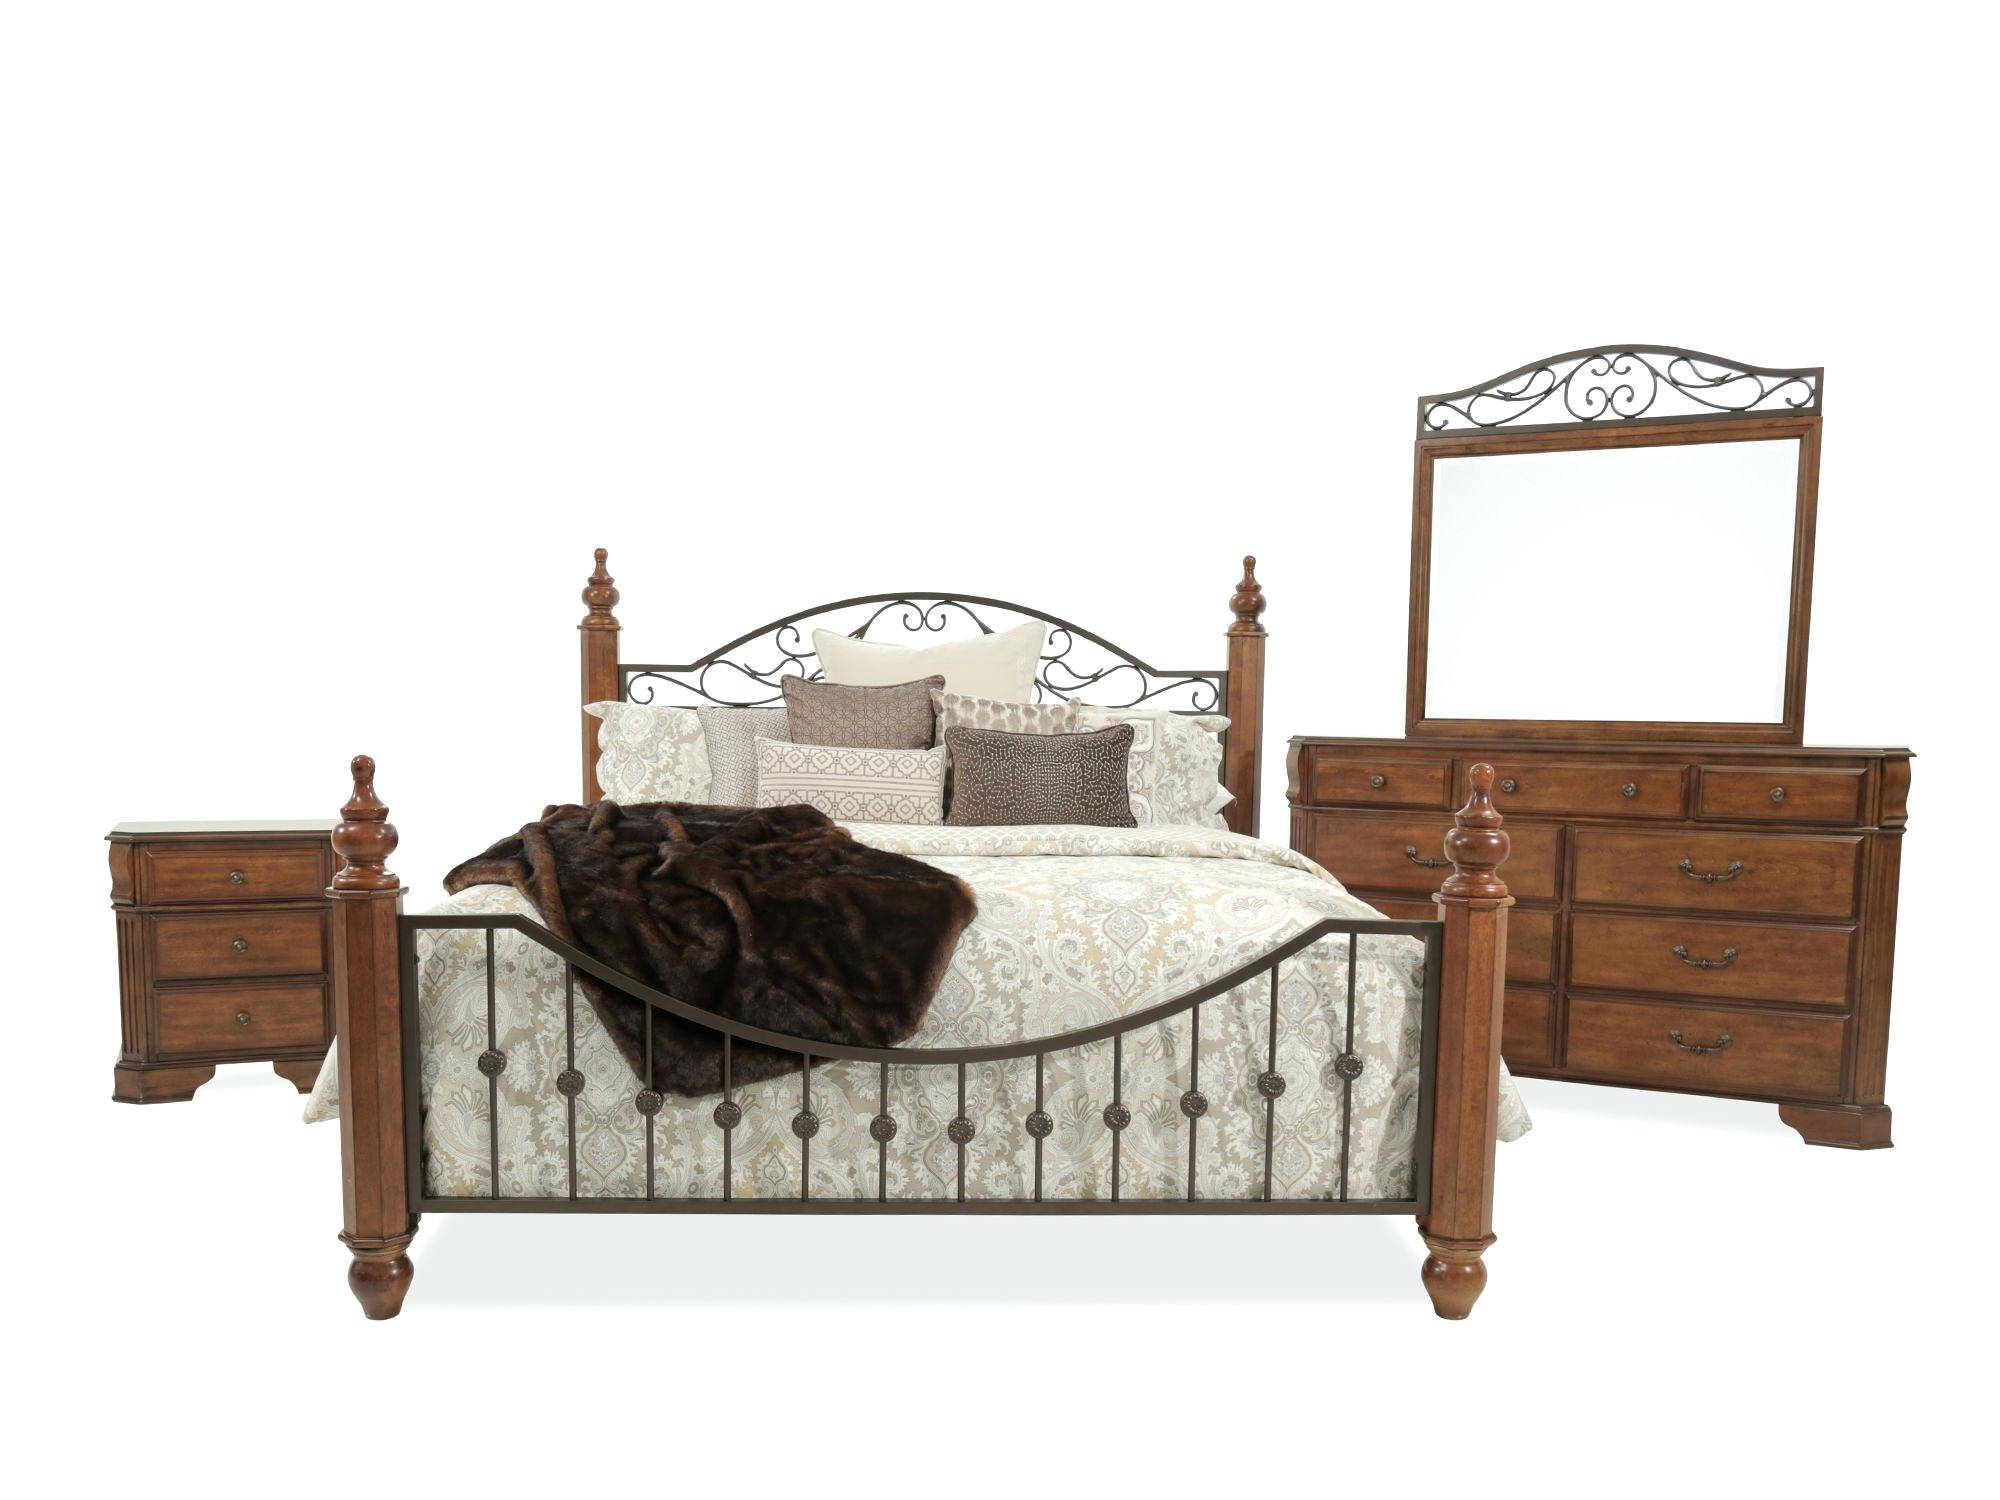 Mathis Brothers Furniture Bedroom Sets Niid in measurements 2000 X 1500